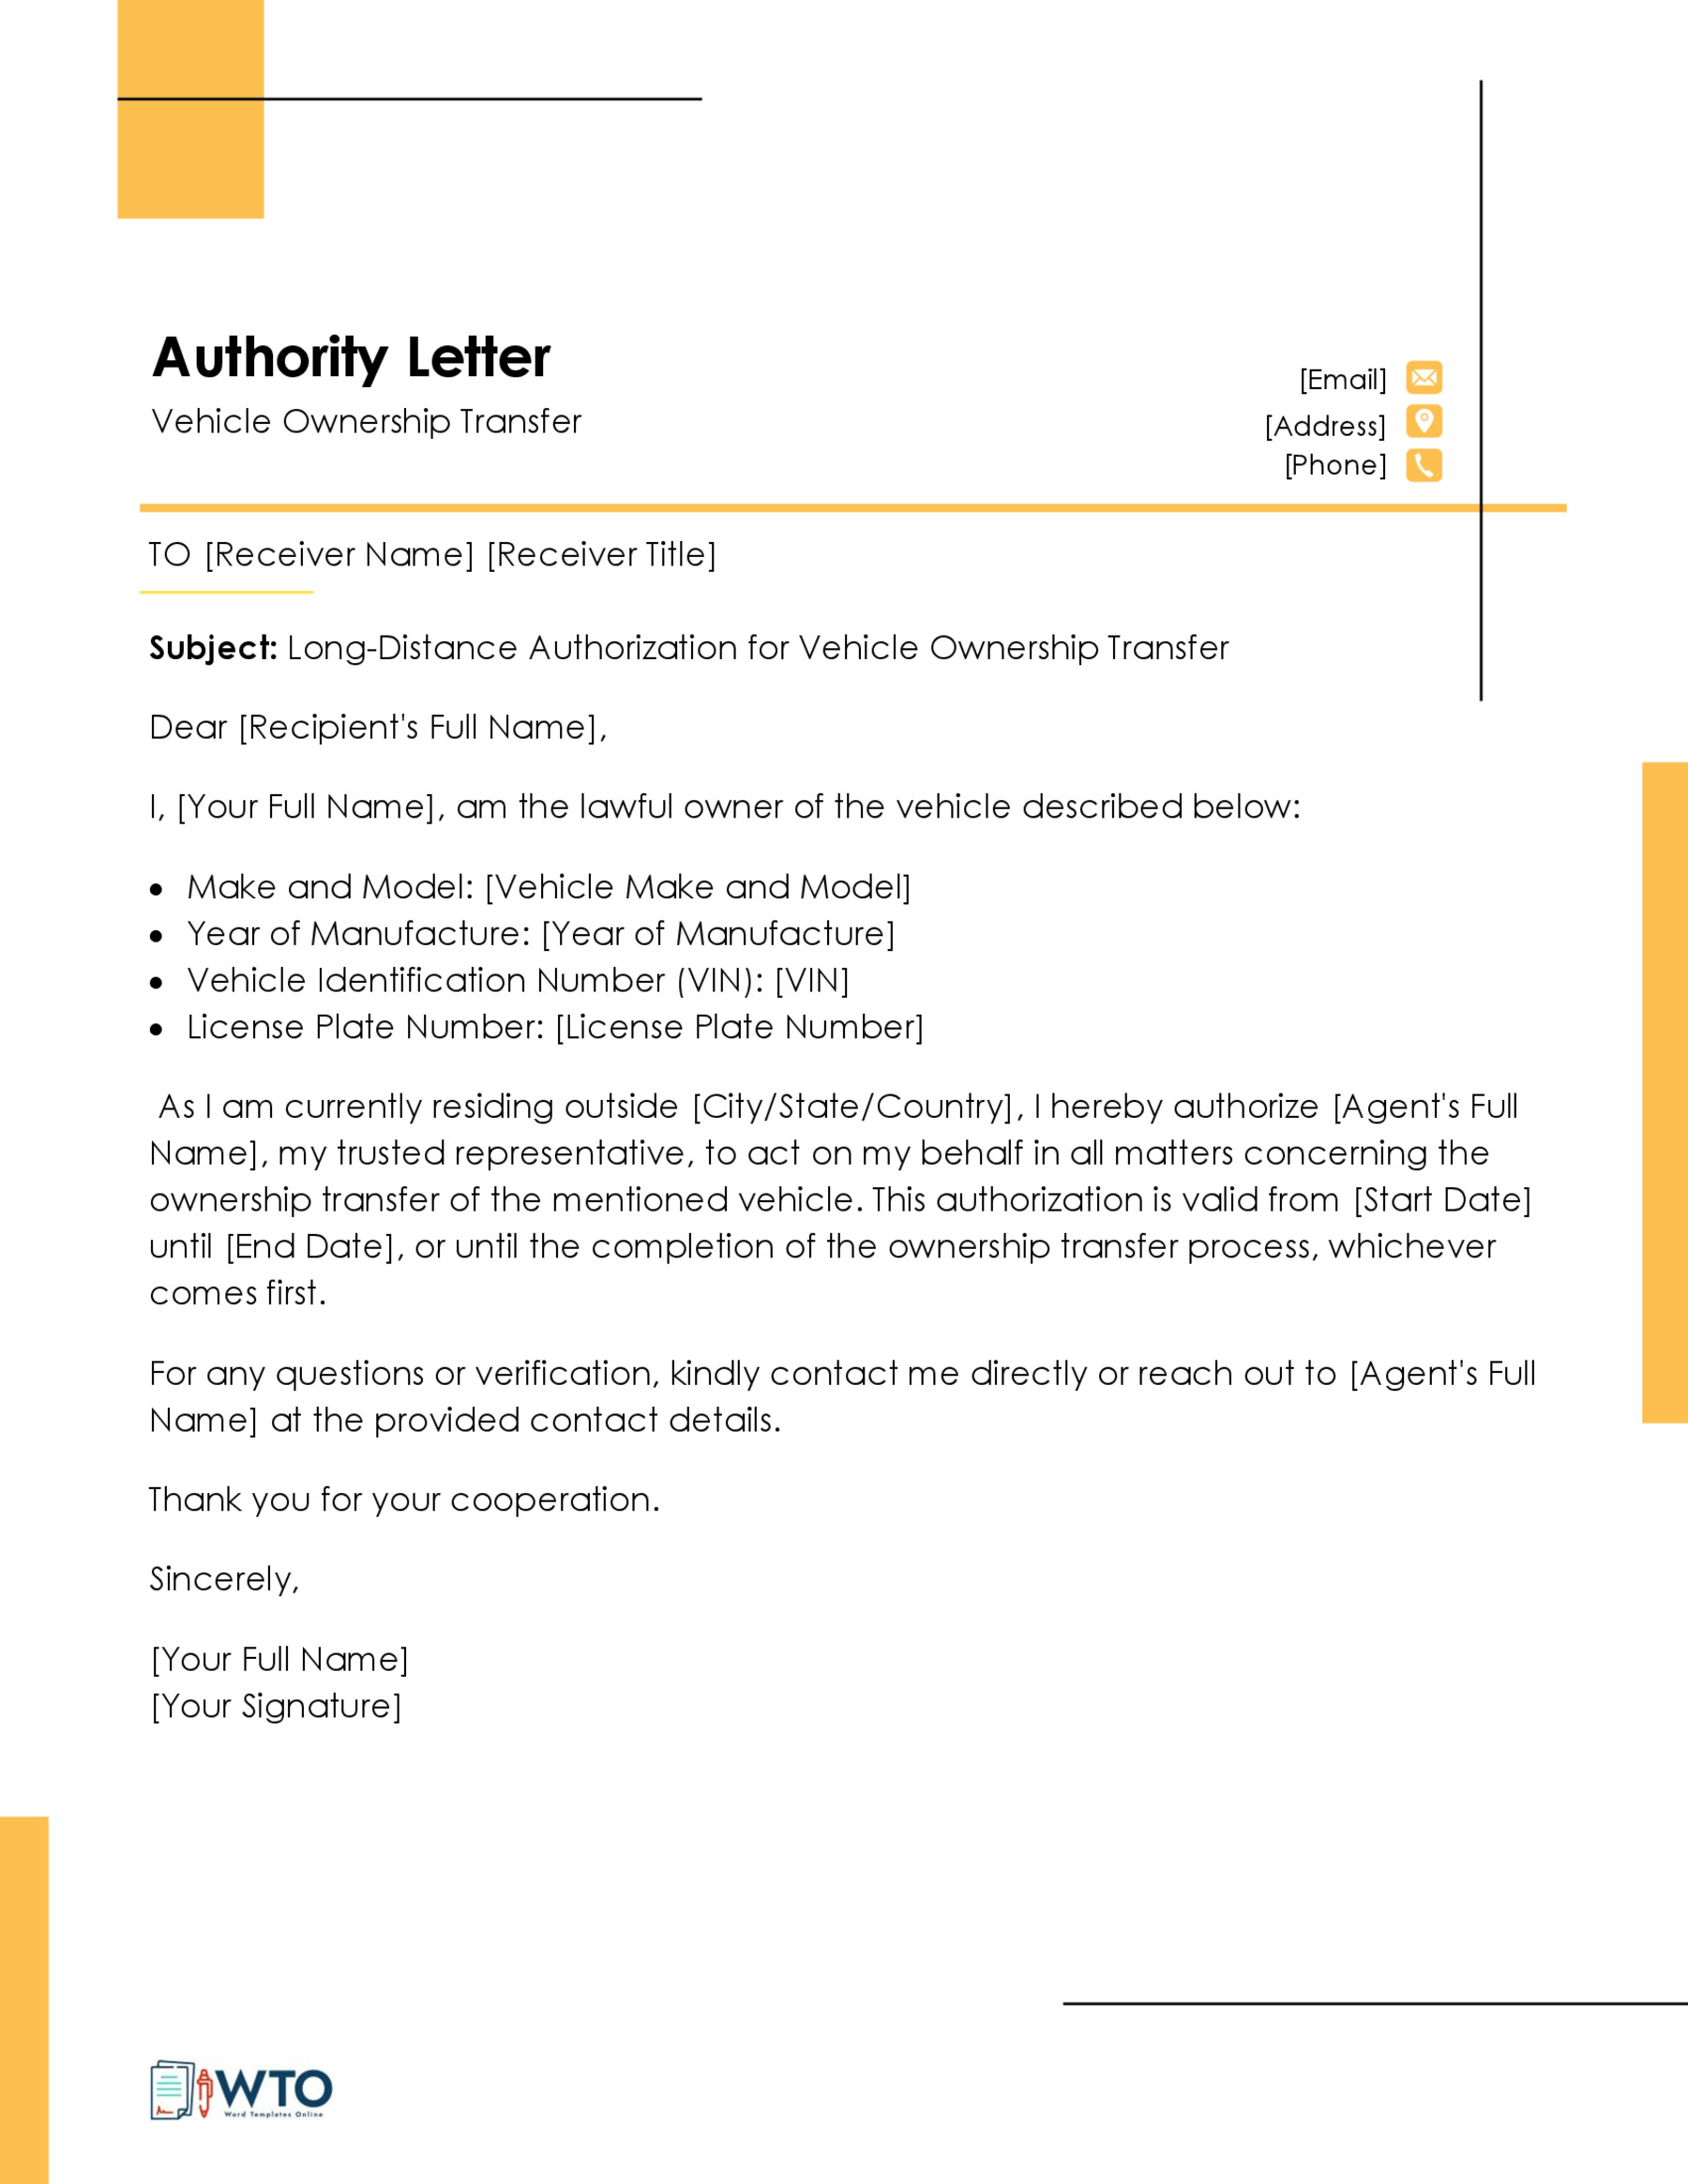 Authorization Letter Transfer Vehicle Ownership Letter Template-Free Download